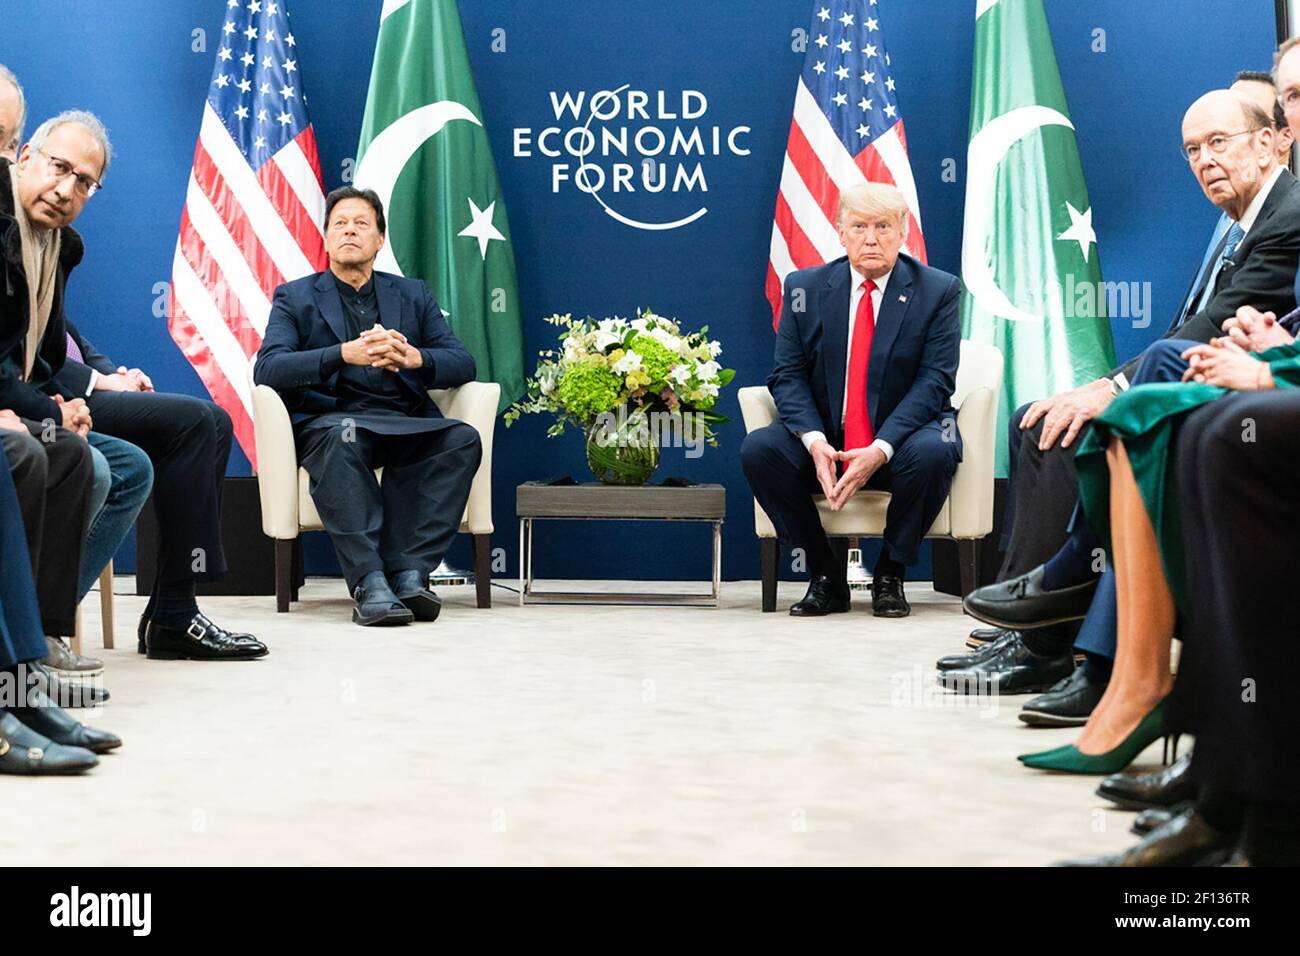 President Donald Trump joined by Secretary of Commerce Wilbur Ross and other members of the U.S. Delegation meets with the Prime Minister of the Islamic Republic of Pakistan Imran Khan during the 50th Annual World Economic Forum meeting Tuesday Jan. 21 2020 at the Davos Congress Centre in Davos Switzerland. Stock Photo